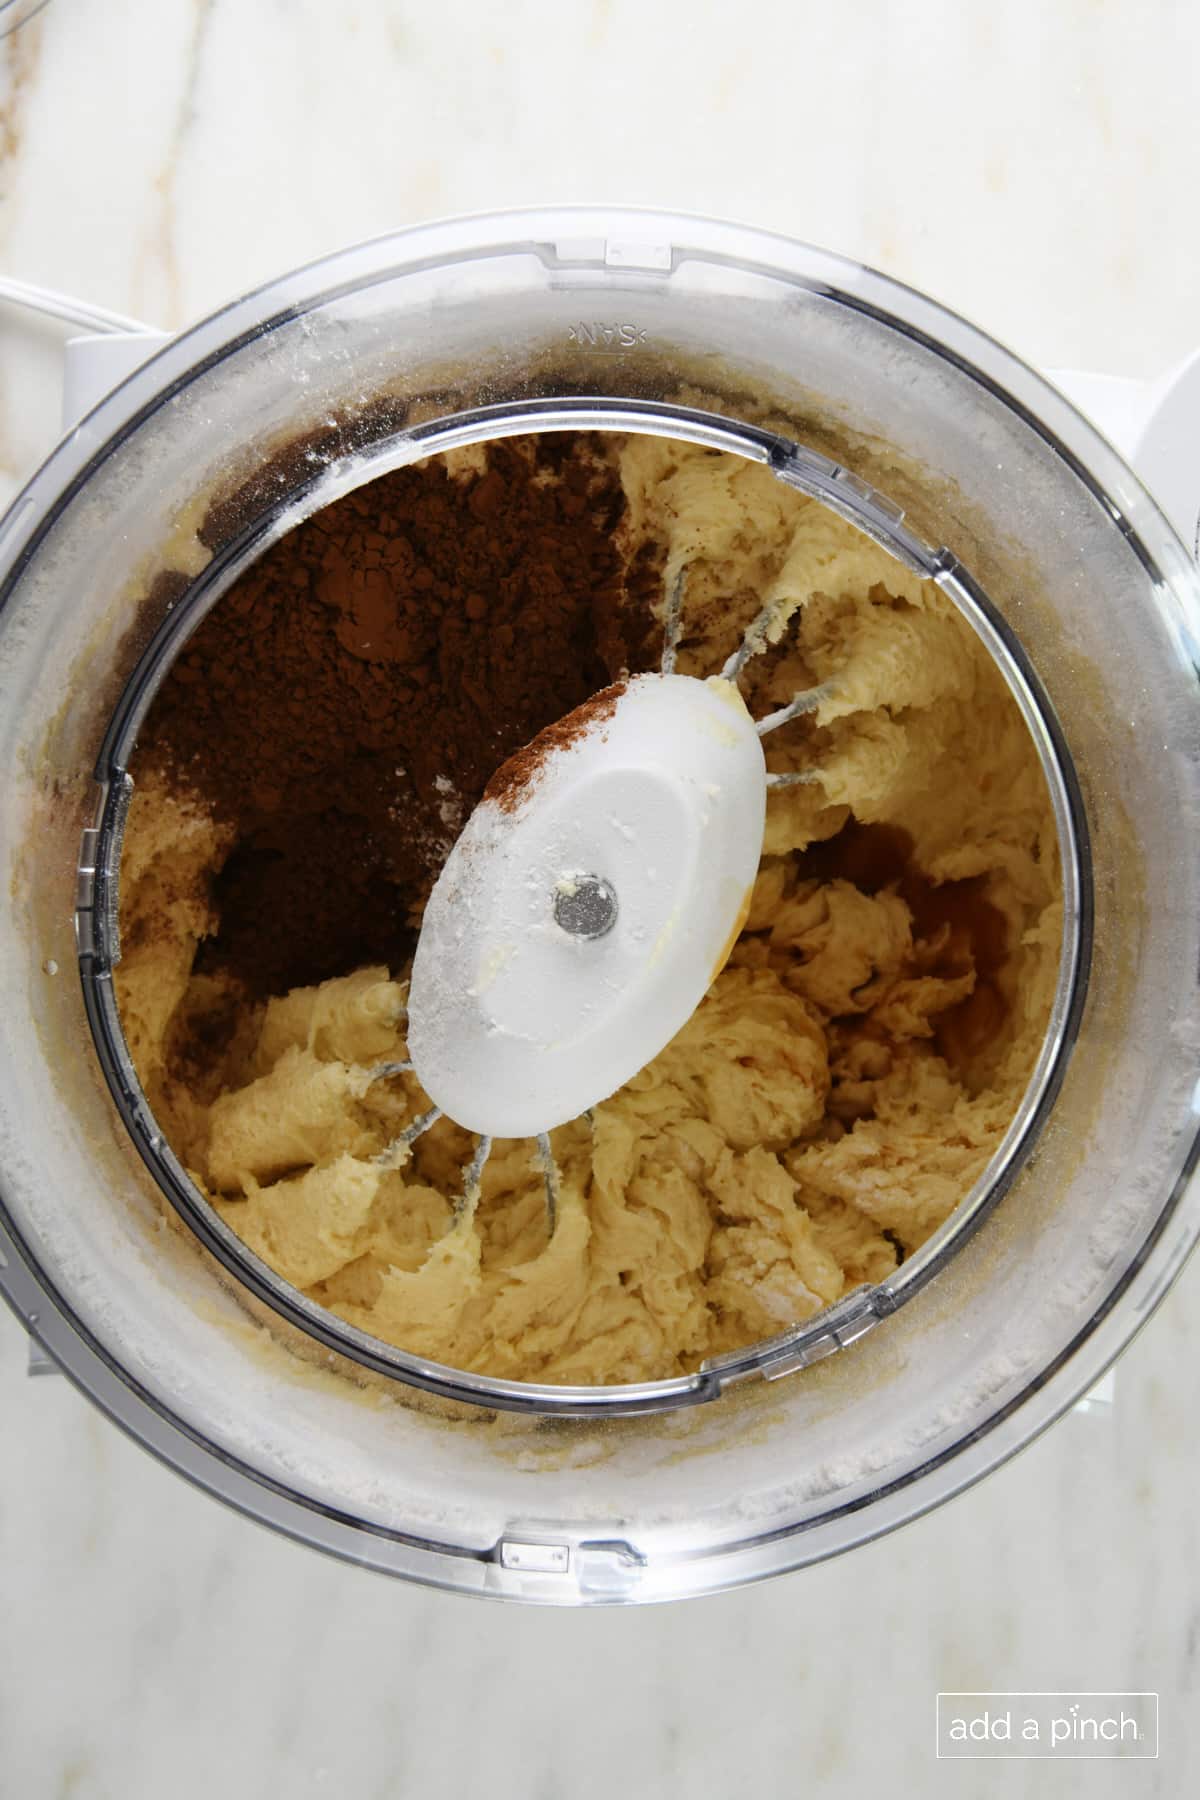 Add cocoa powder and vanilla extract to the cake batter in the mixer.